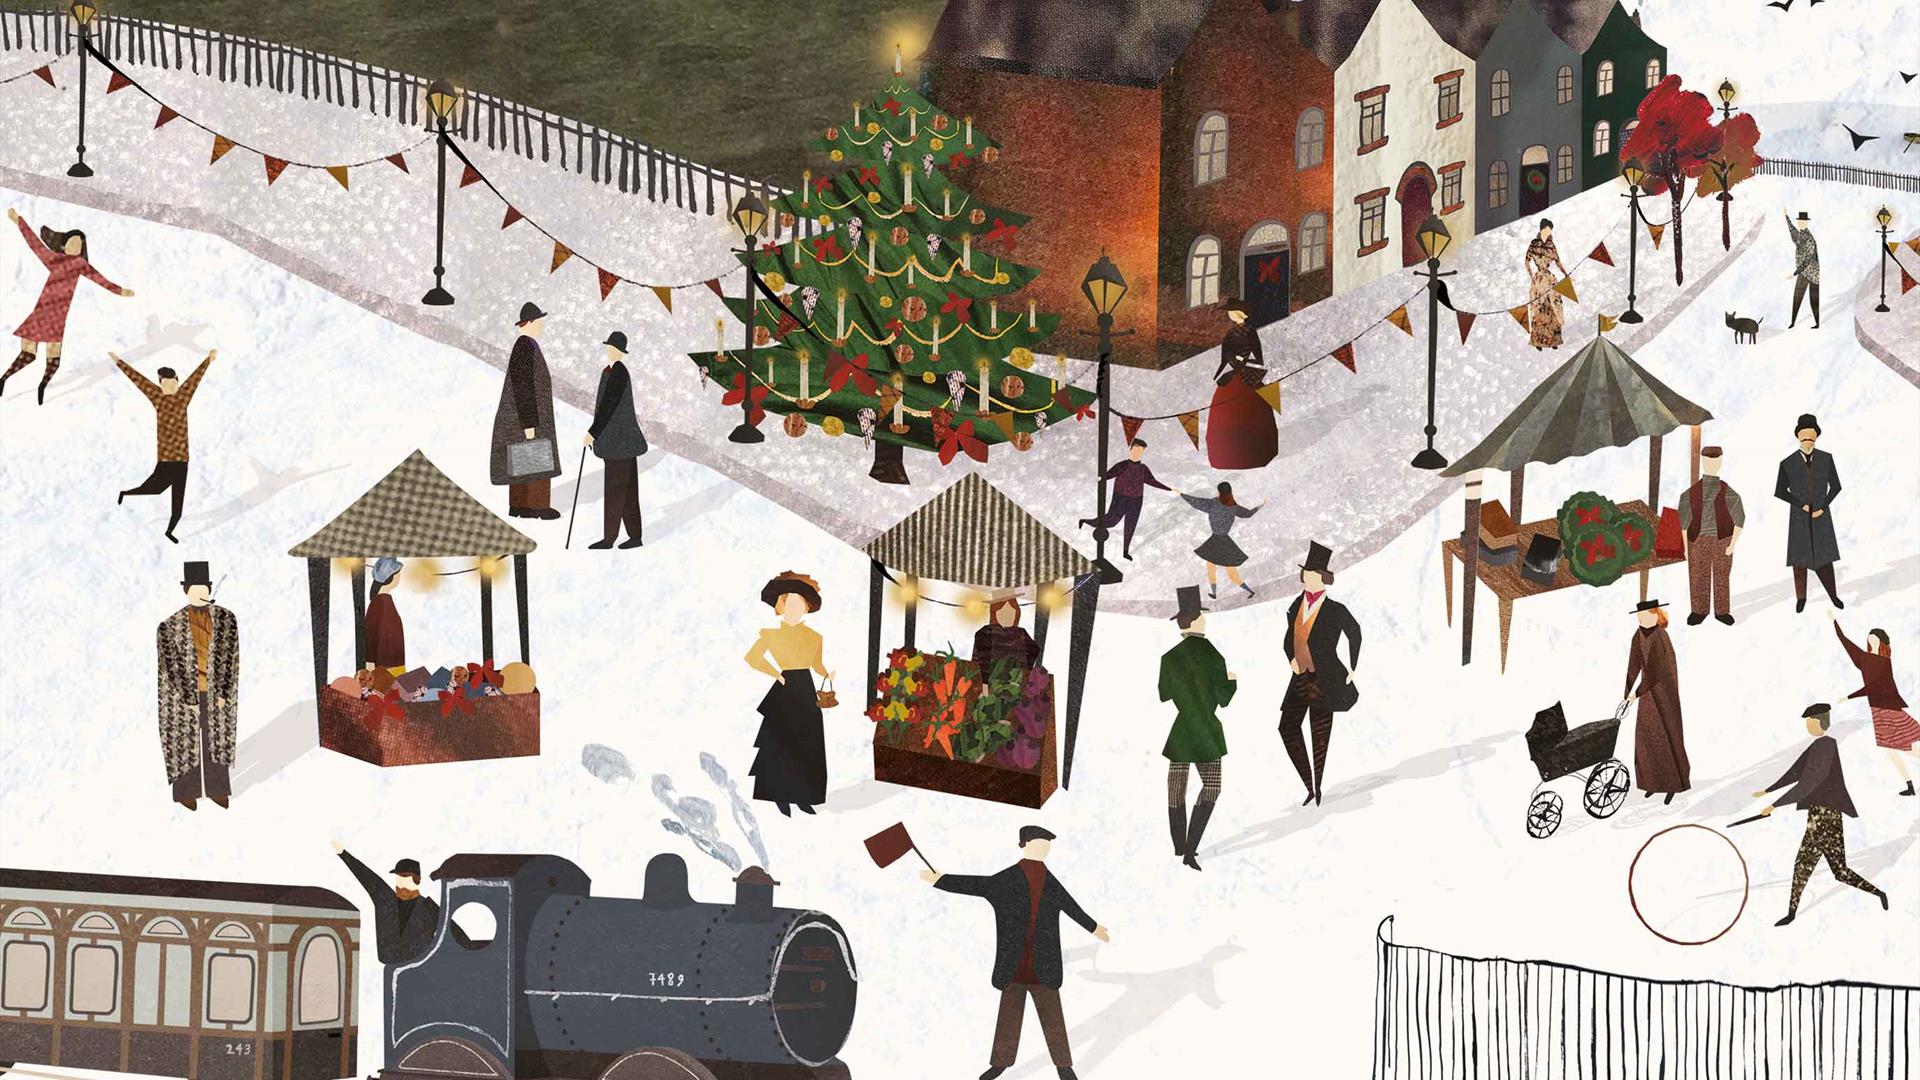 Drawing of people in Victorian costume in town centre with snowy backdrop, stalls and steam train.